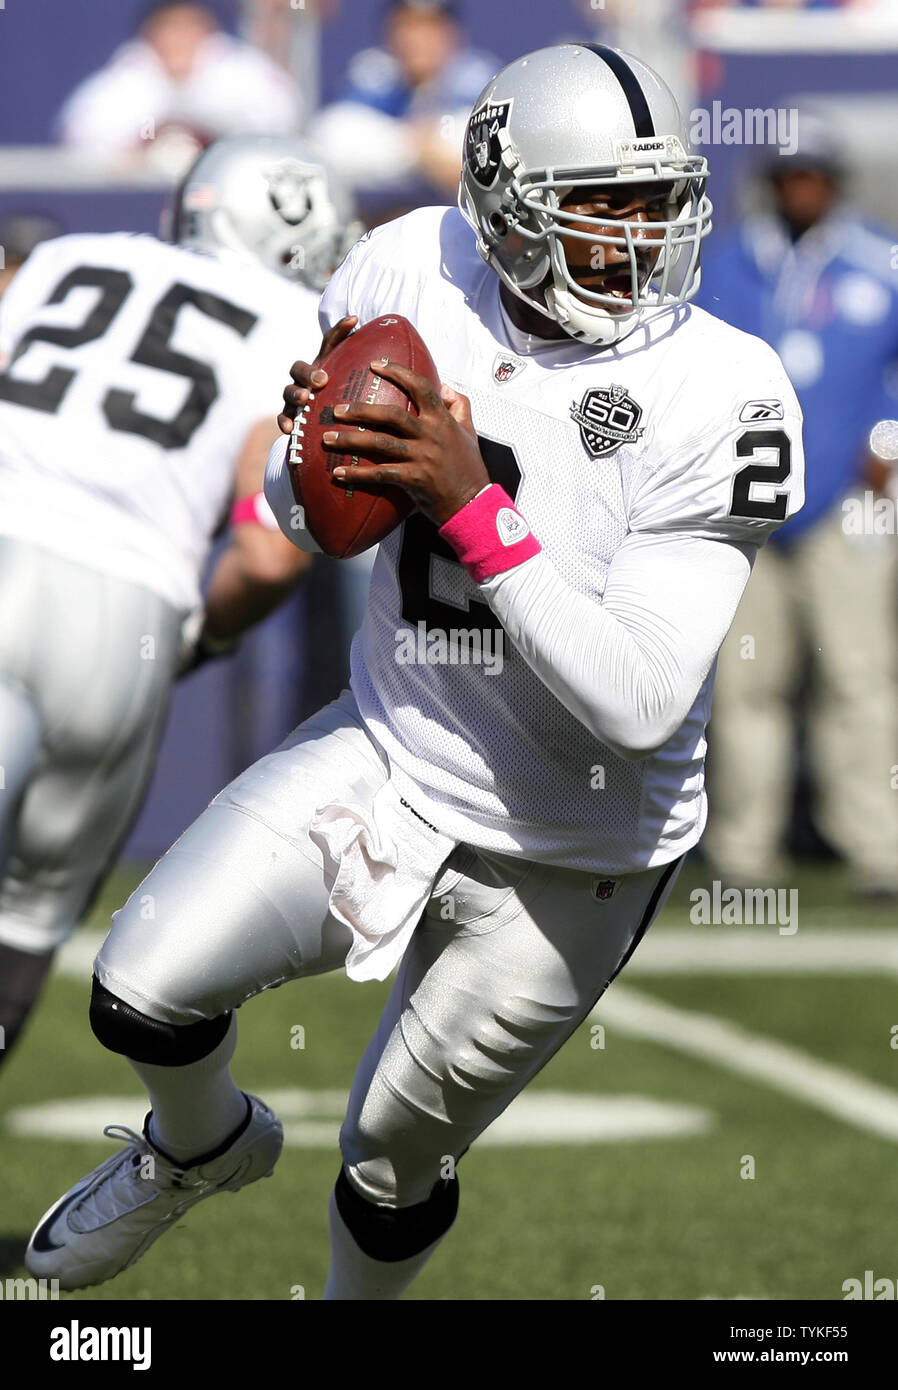 Oakland Raiders quarterback JaMarcus Russell runs out of the pocket in the  second quarter against the New York Giants in week 5 of the NFL season at  Giants Stadium in East Rutherford,